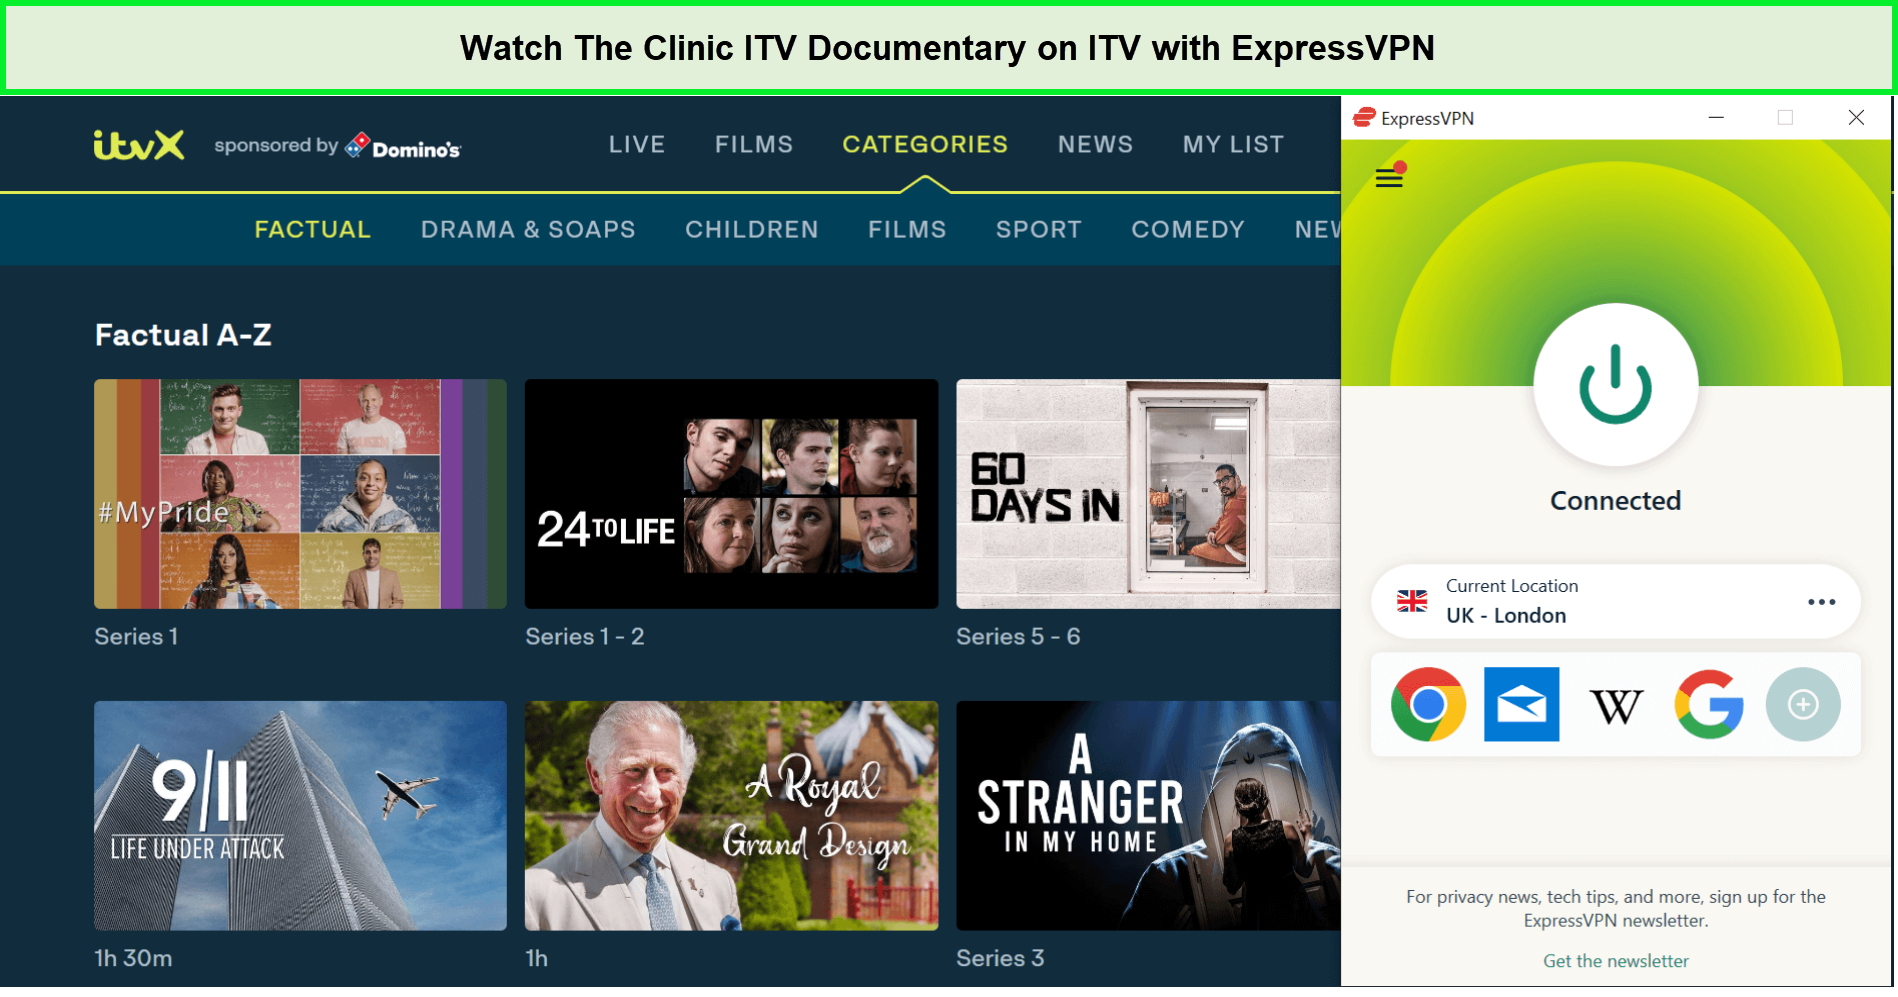 Watch-The-Clinic-ITV-Documentary-outside-UK-on-ITV-with-ExpressVPN.